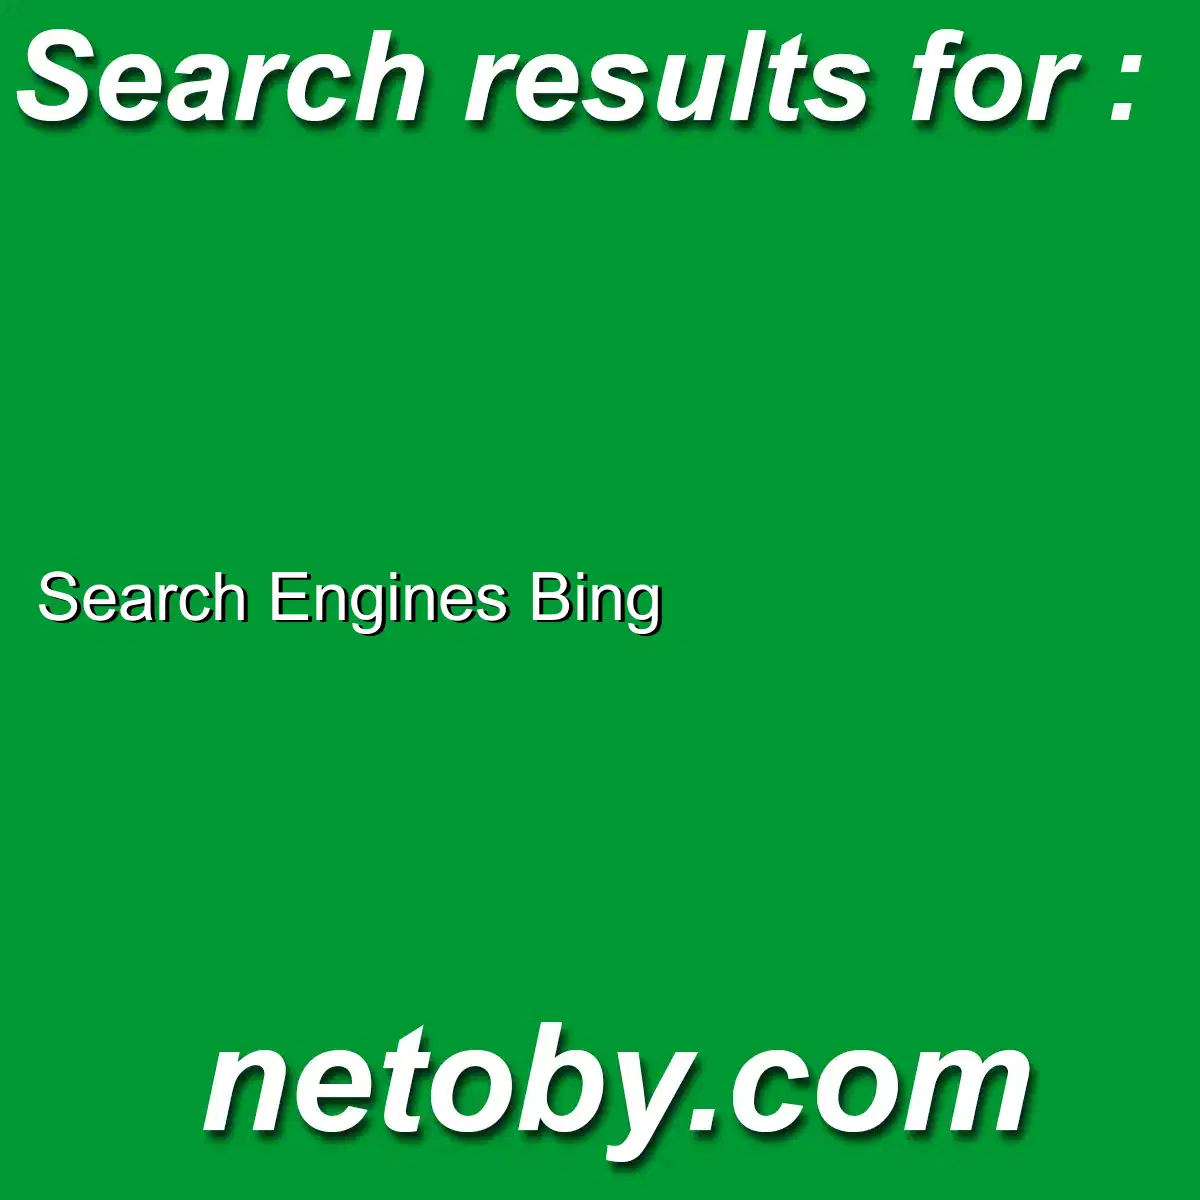 ﻿Search Engines Bing